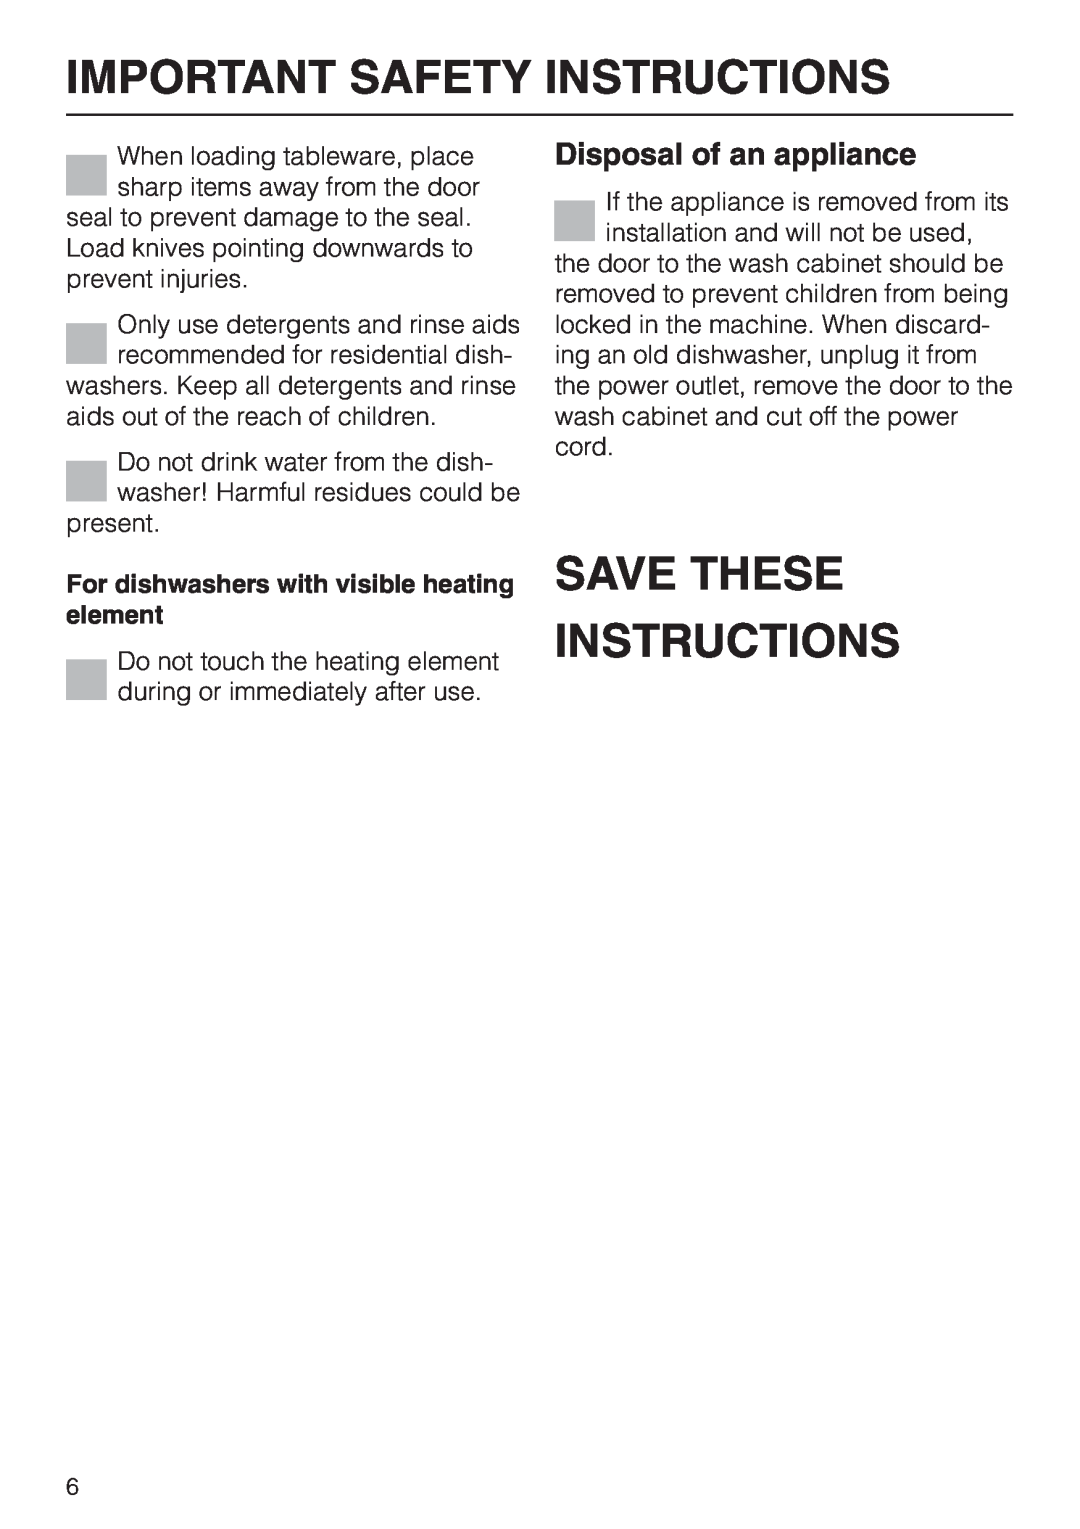 Miele G 894 SC, G 694 SC manual Save These Instructions, Disposal of an appliance, Important Safety Instructions 